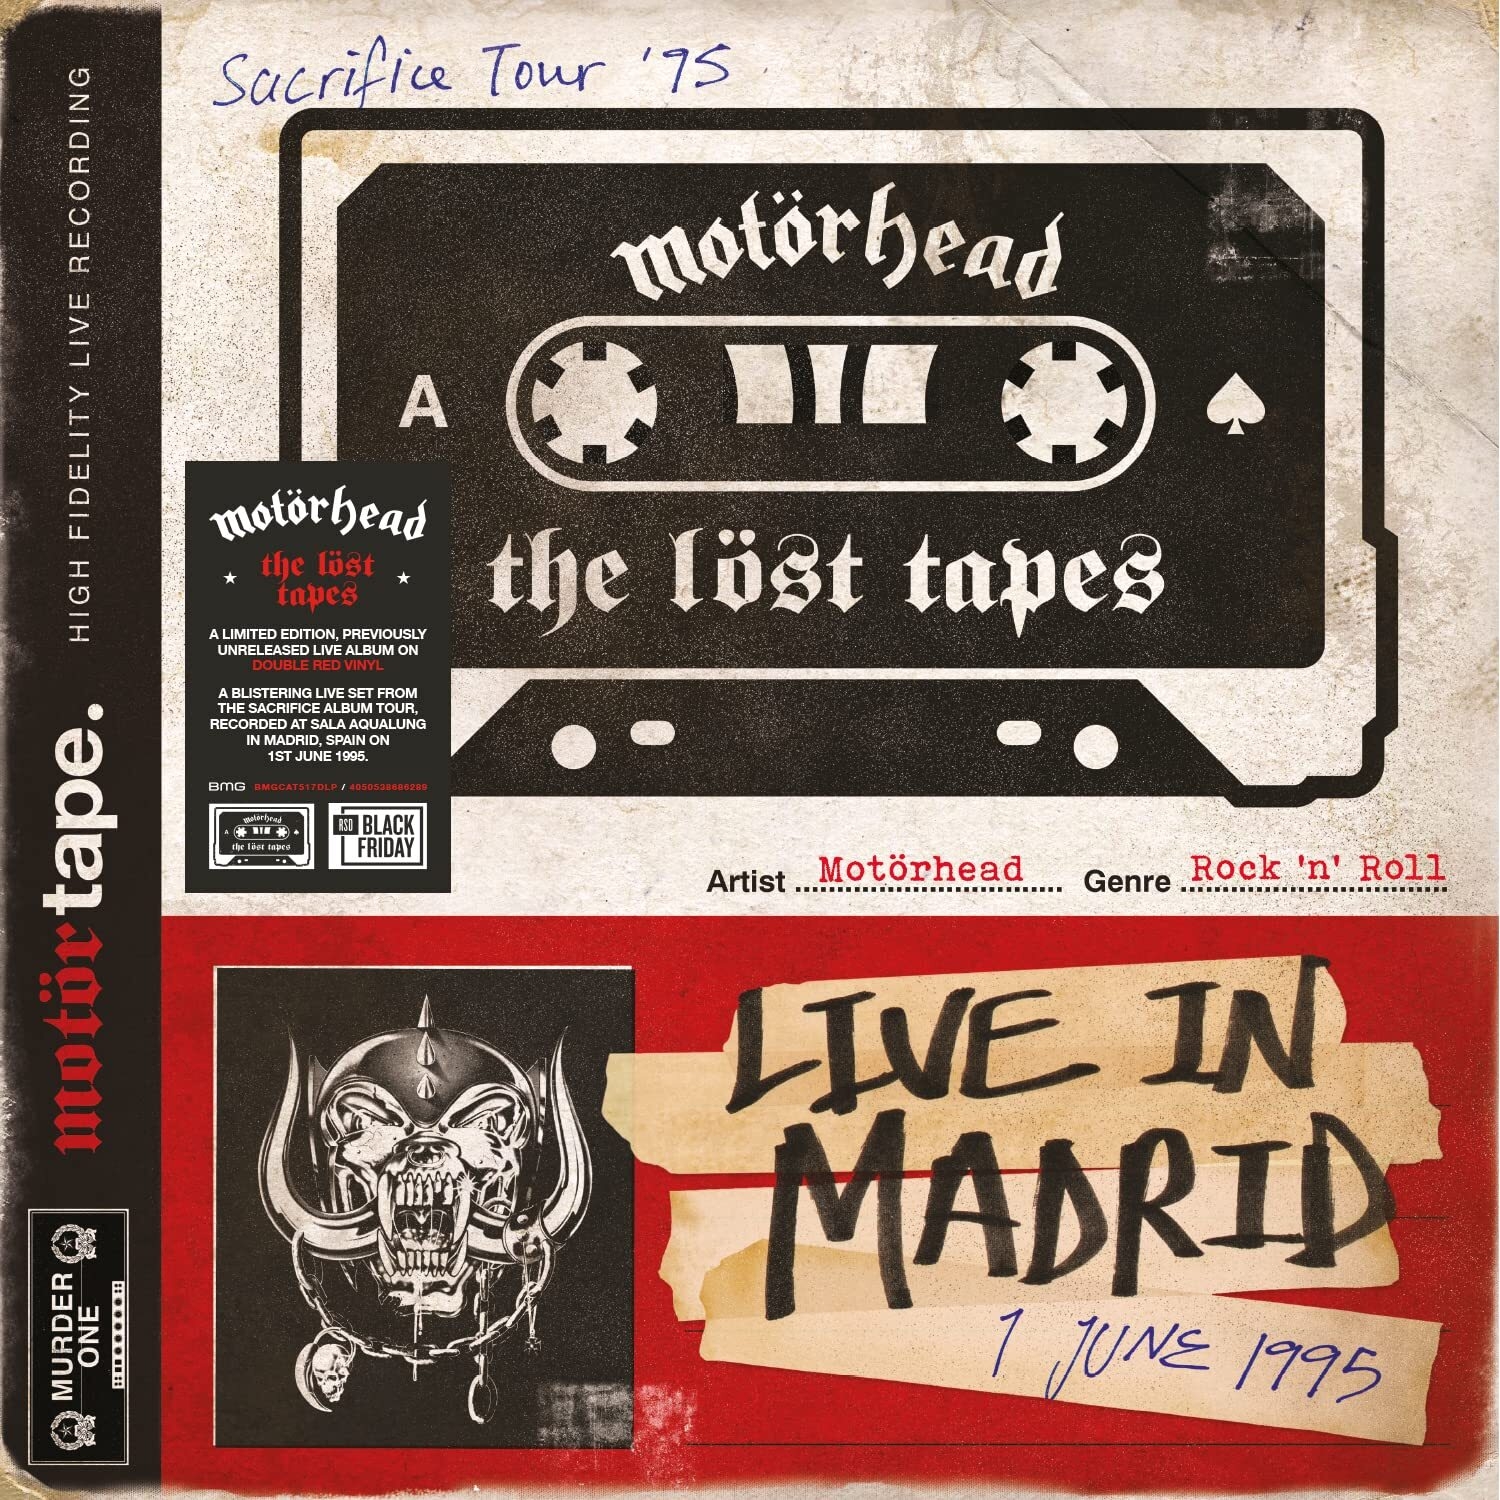 Виниловая Пластинка Motorhead The Lost Tapes Vol. 1 (Live In Madrid 1 June 1995) (4050538686289) the offspring – greatest hits limited edition lp